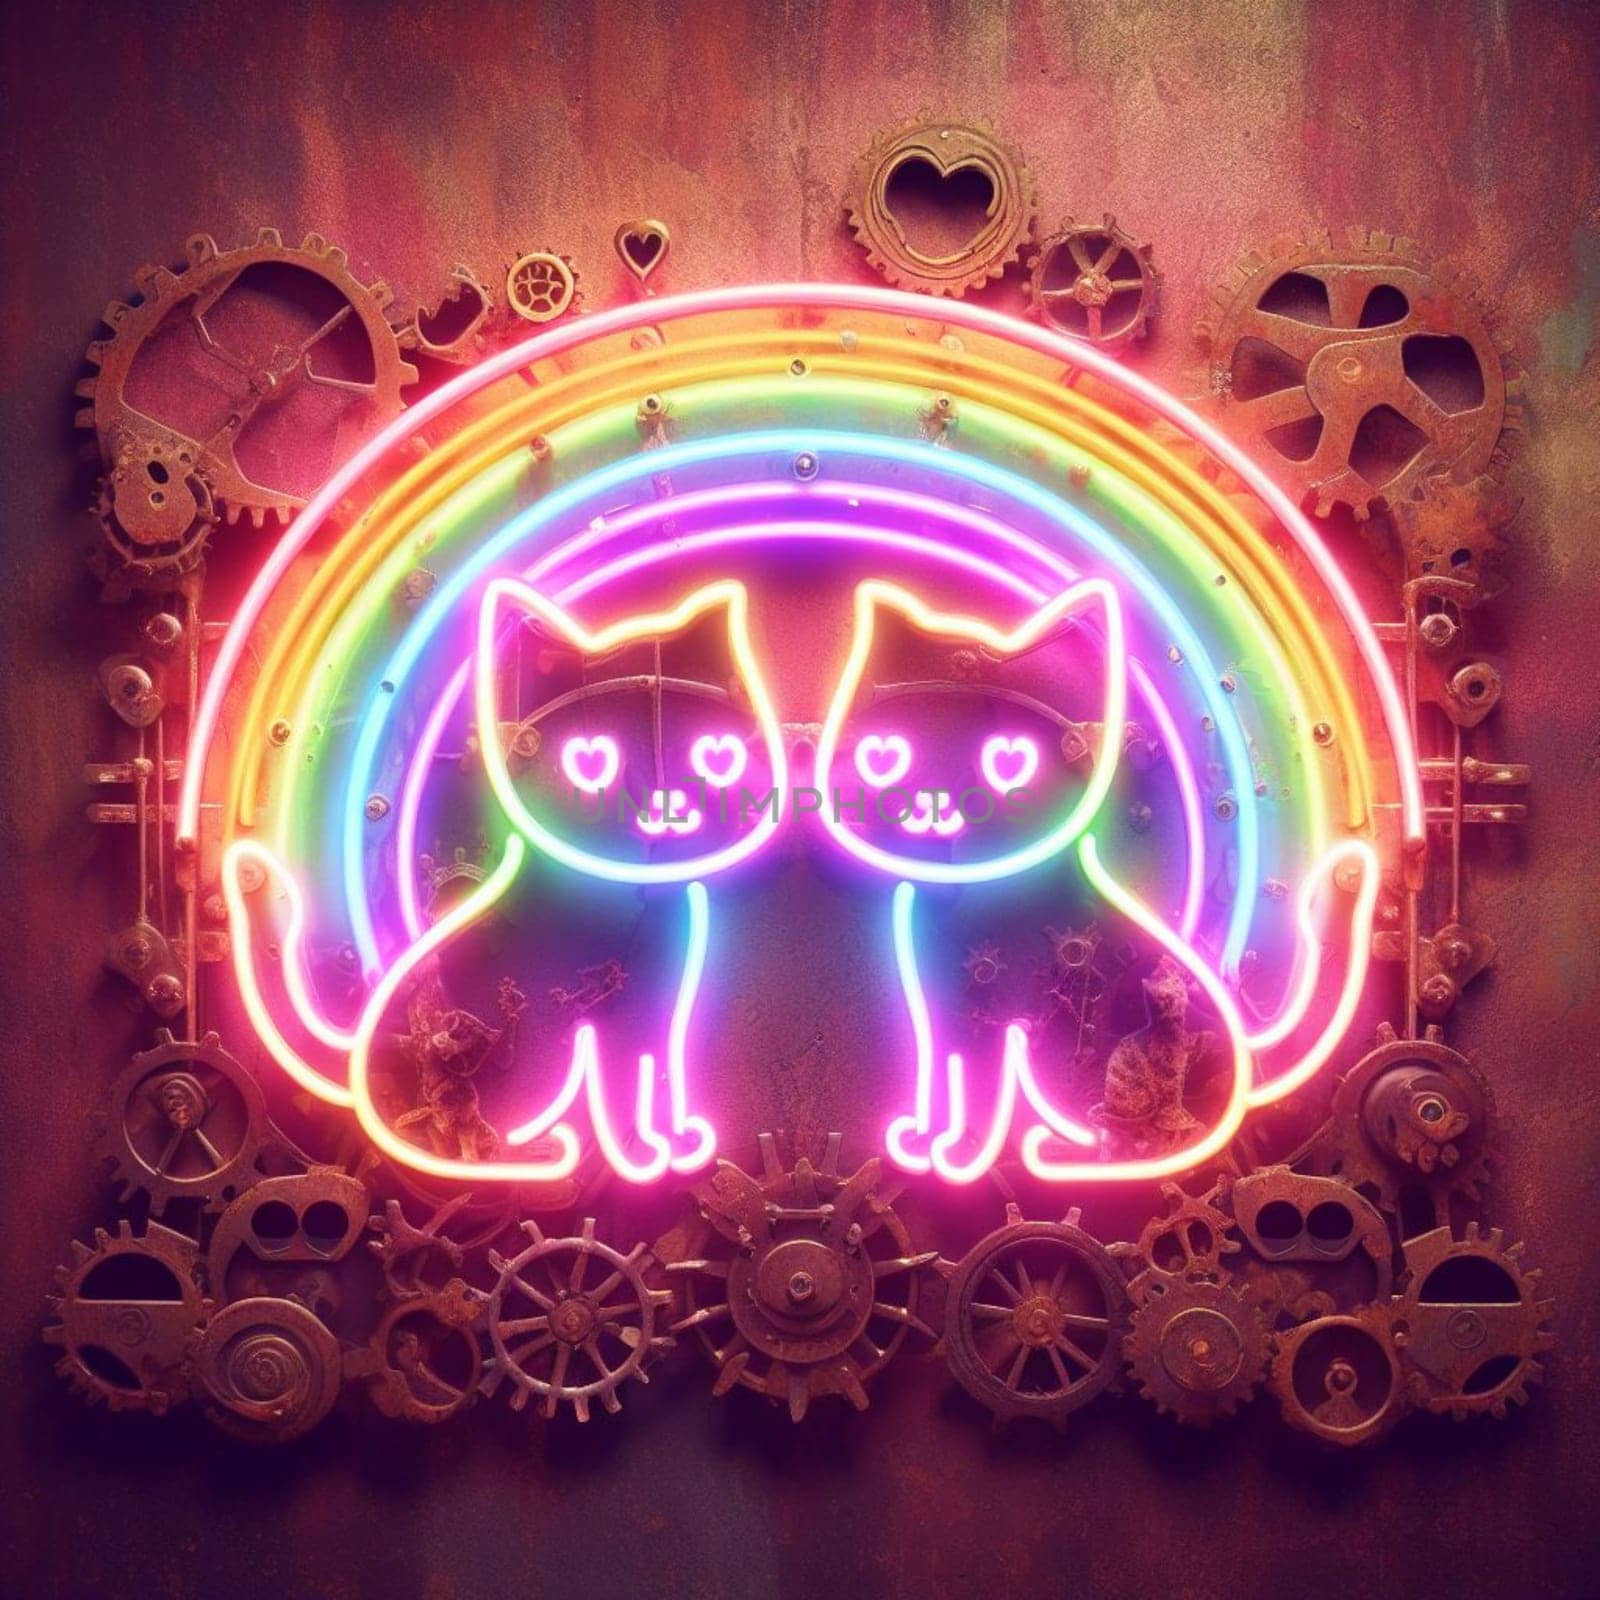 kittens in love steampunk neon valentines day illustration concept by verbano